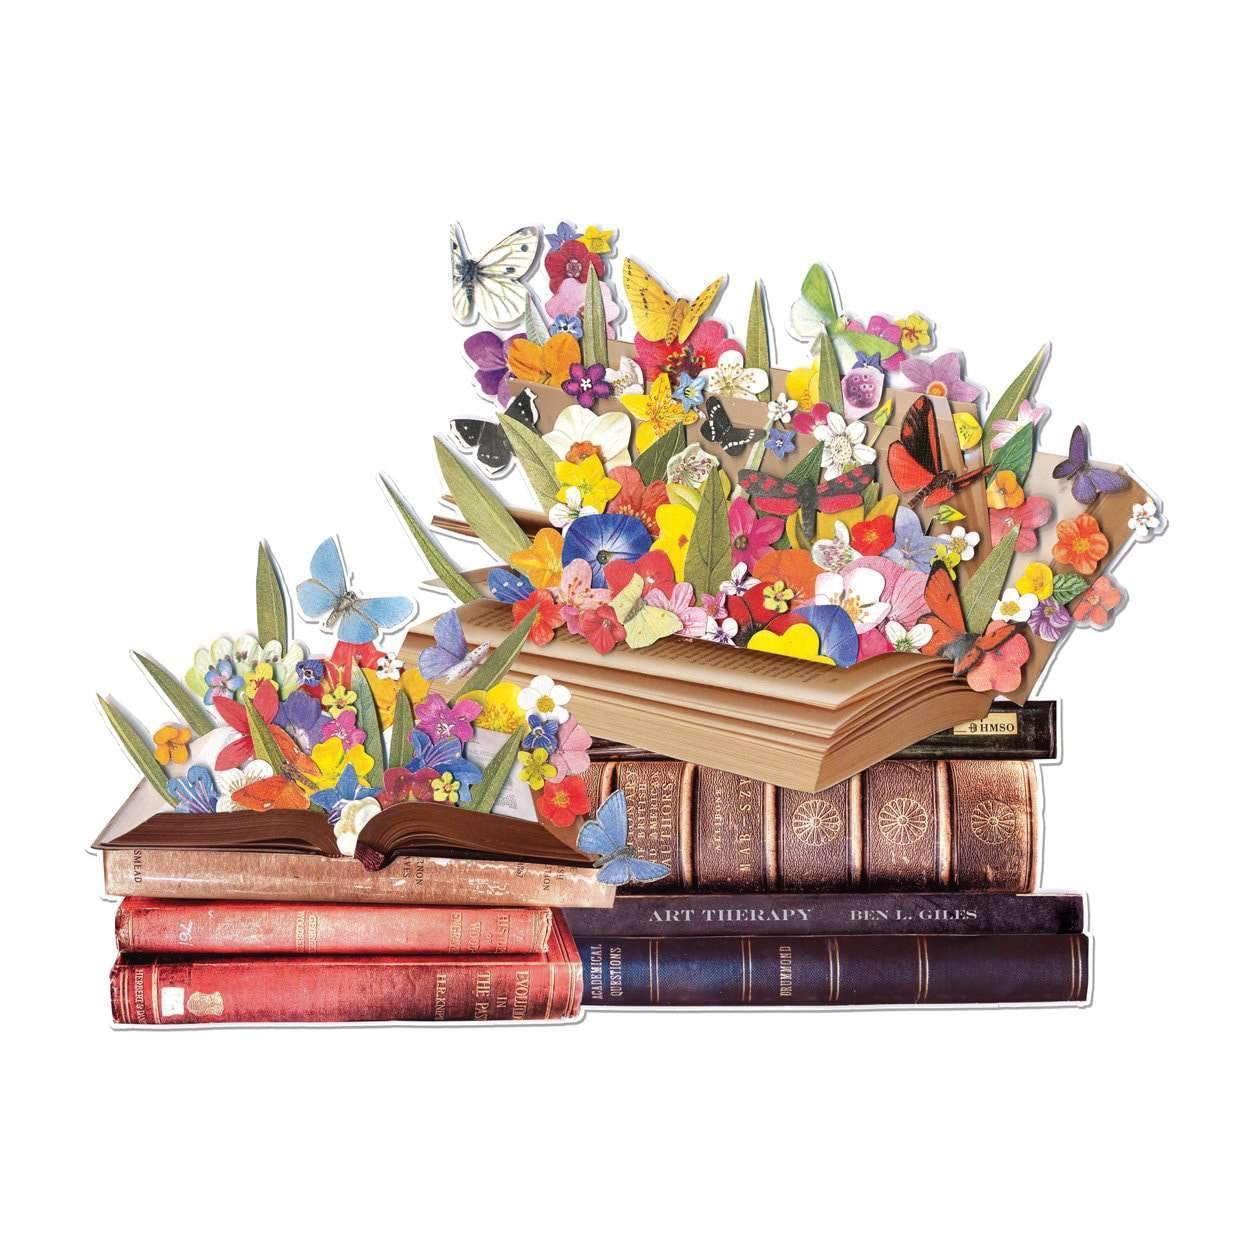 Blooming Books 750 Piece Shaped Jigsaw Puzzle